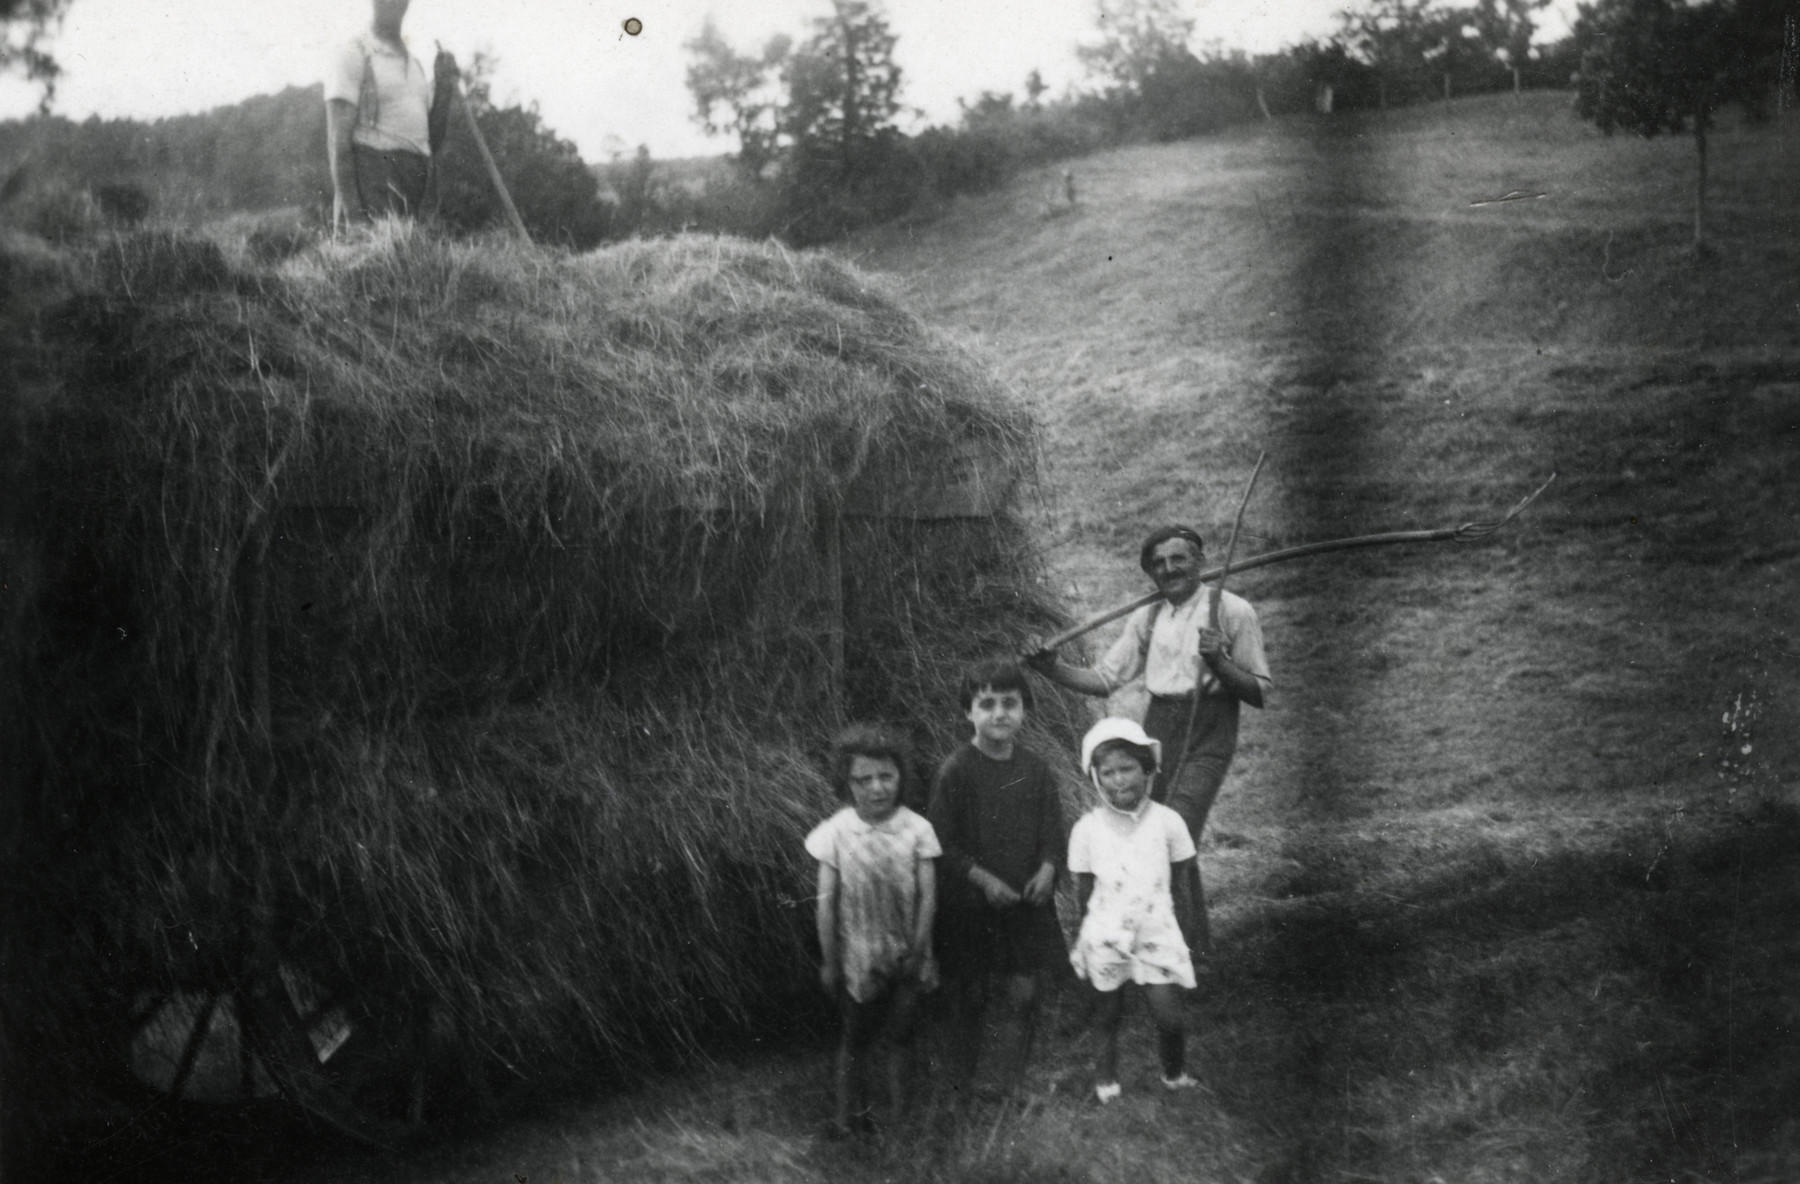 Beatrice Heffes, her father's employer Mr. Combes, and his two daughters pose in front of a haystack. Another farmer can be seen standing on top of the haystack.